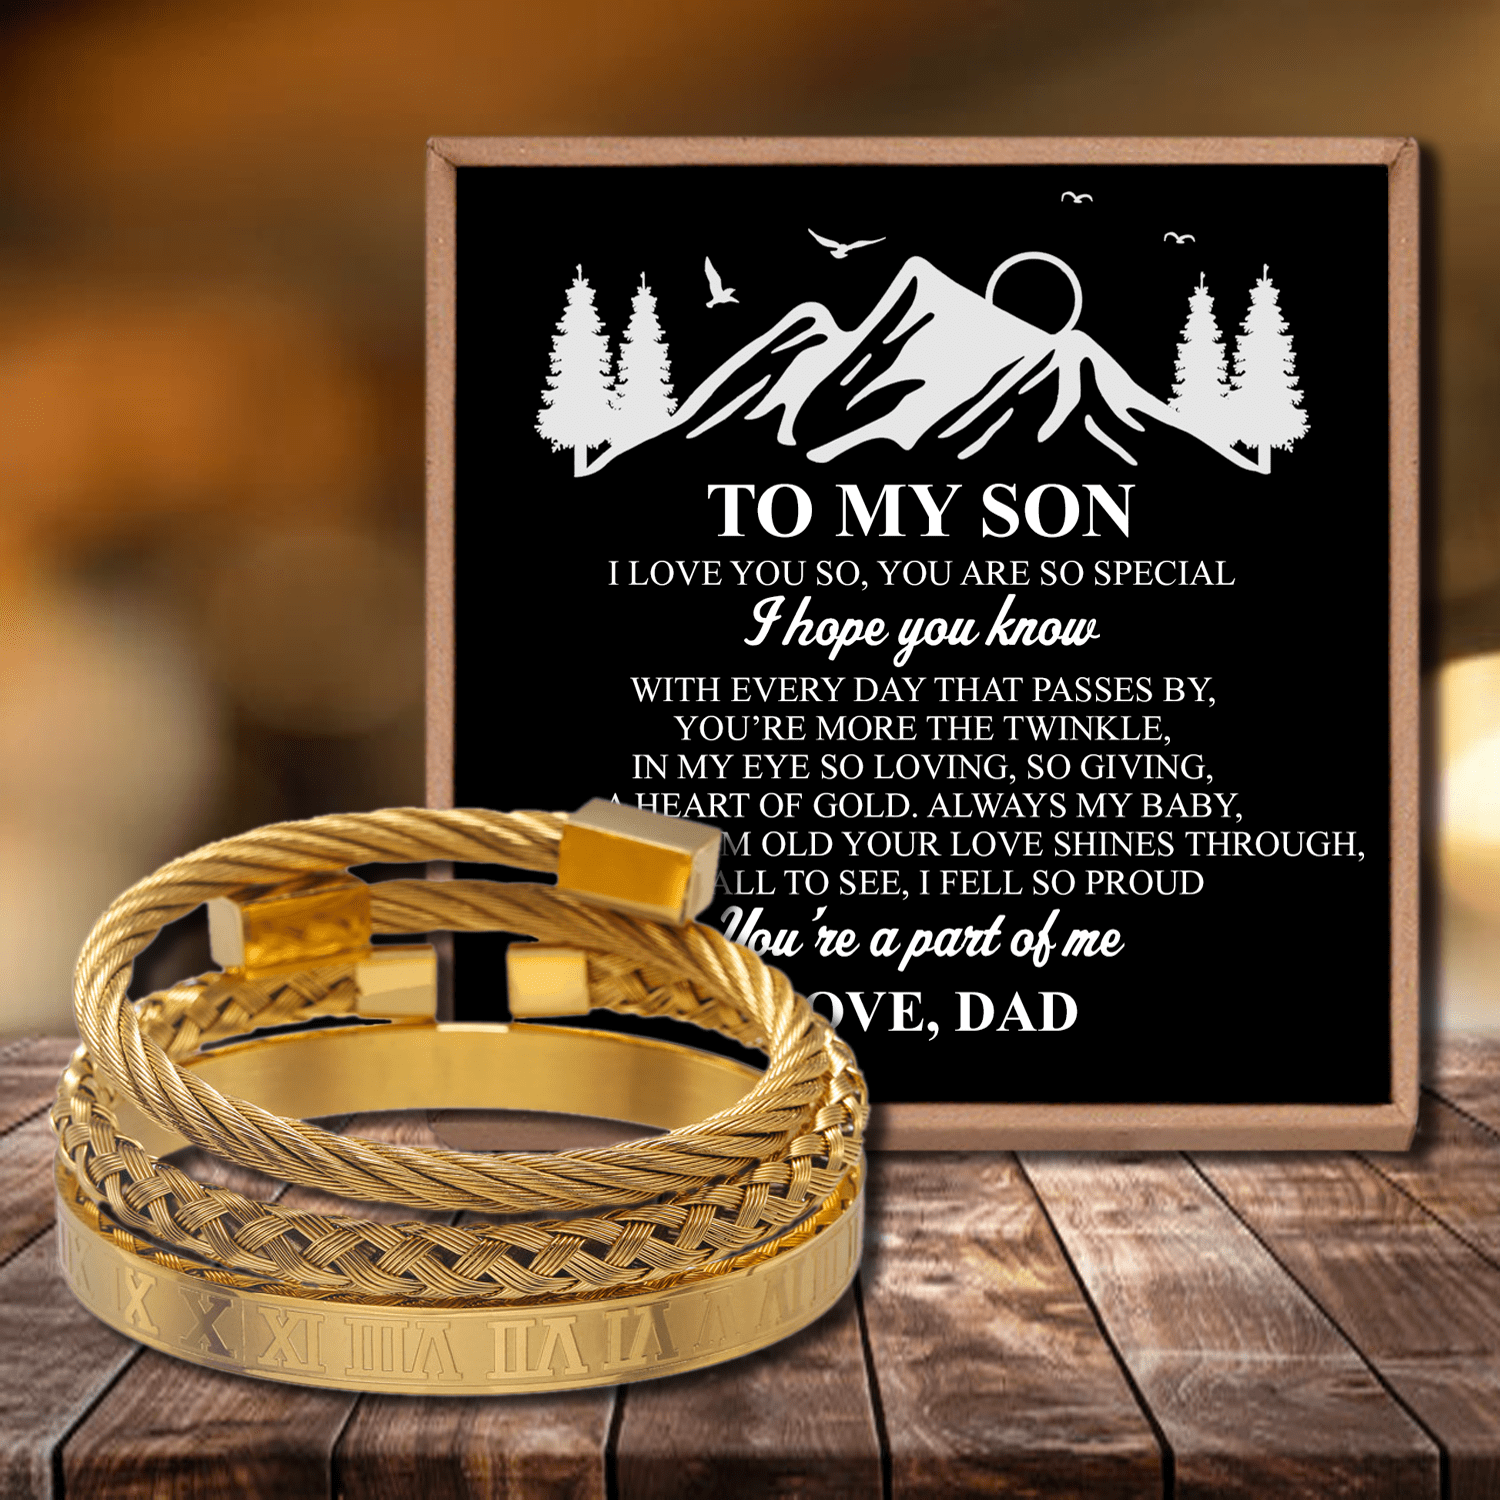 Bracelets Dad To Son - I Fell So Proud Roman Numeral Bangle Weave Bracelets Set Gold GiveMe-Gifts